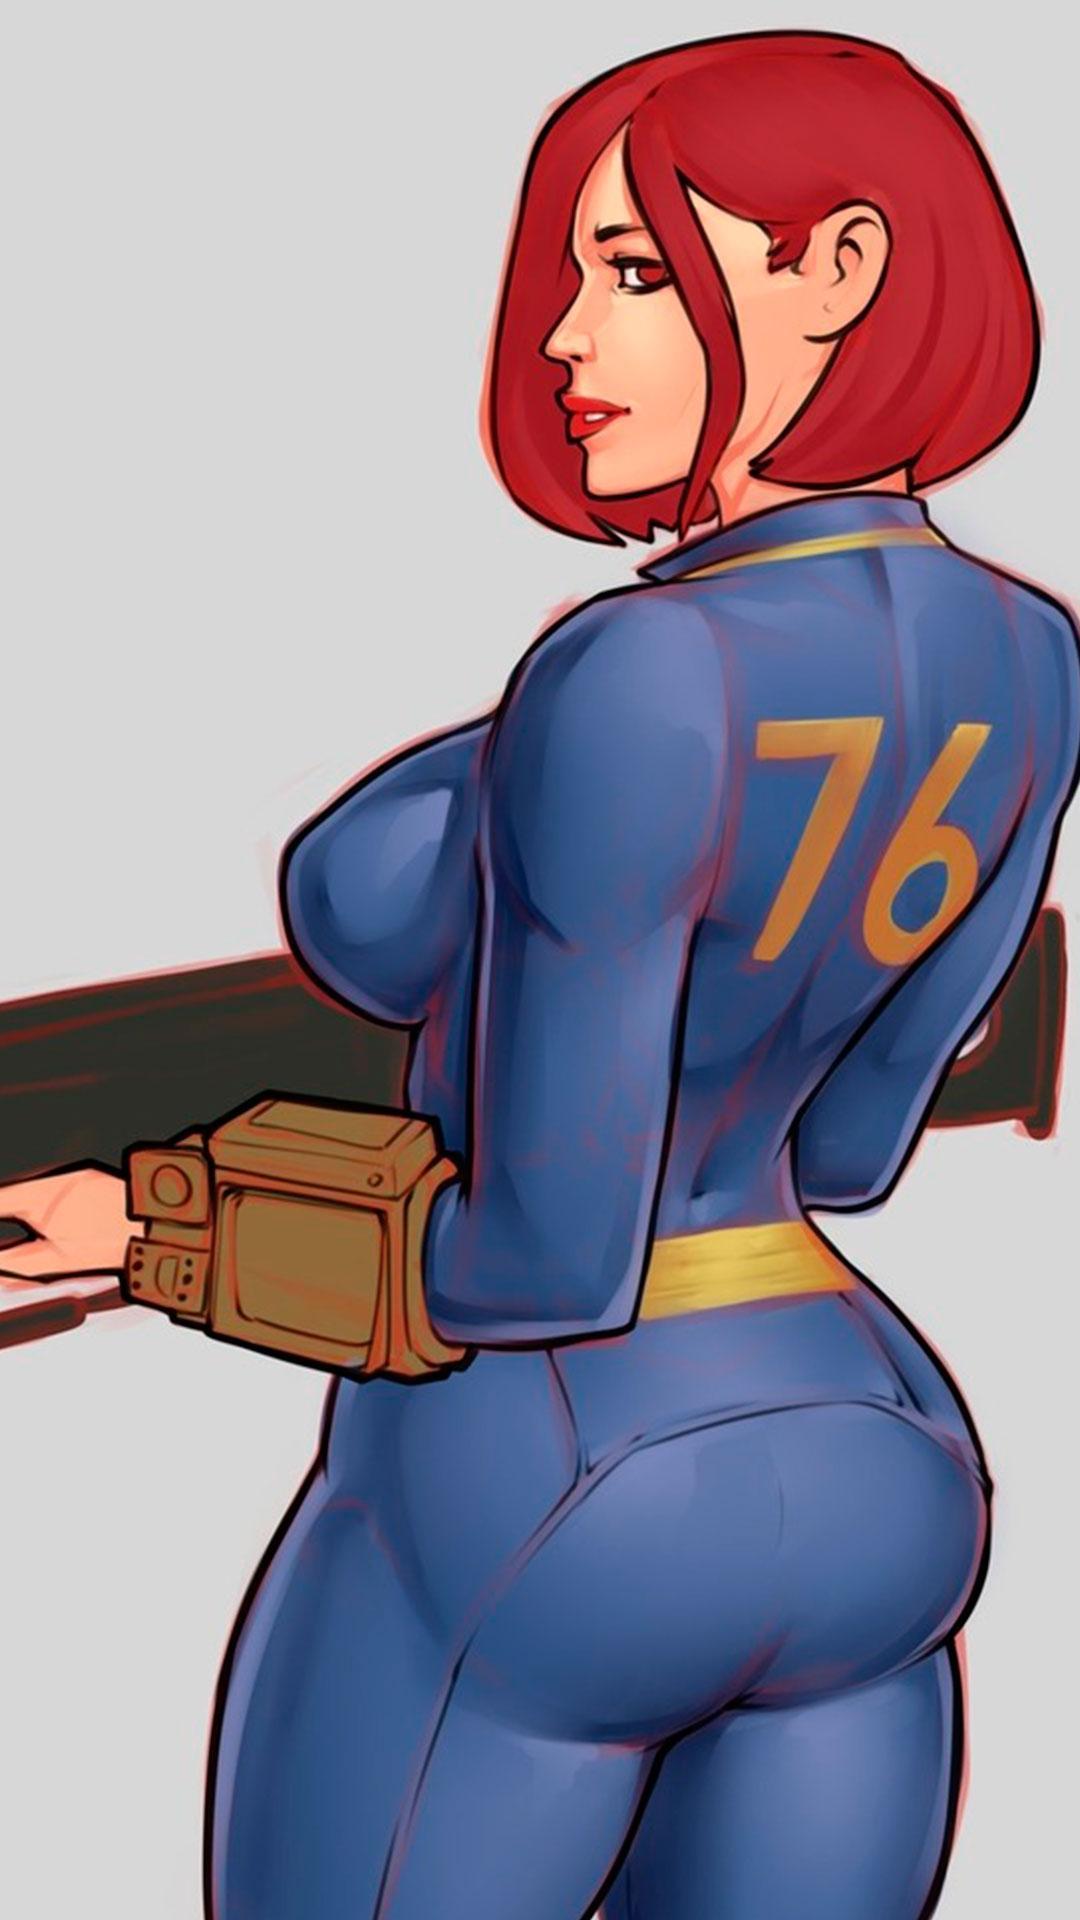 Rule 34 mobile. Fallout 4 Shadman арт. Фоллаут 76 арт. Фоллаут 34. Ваулт гёрл.